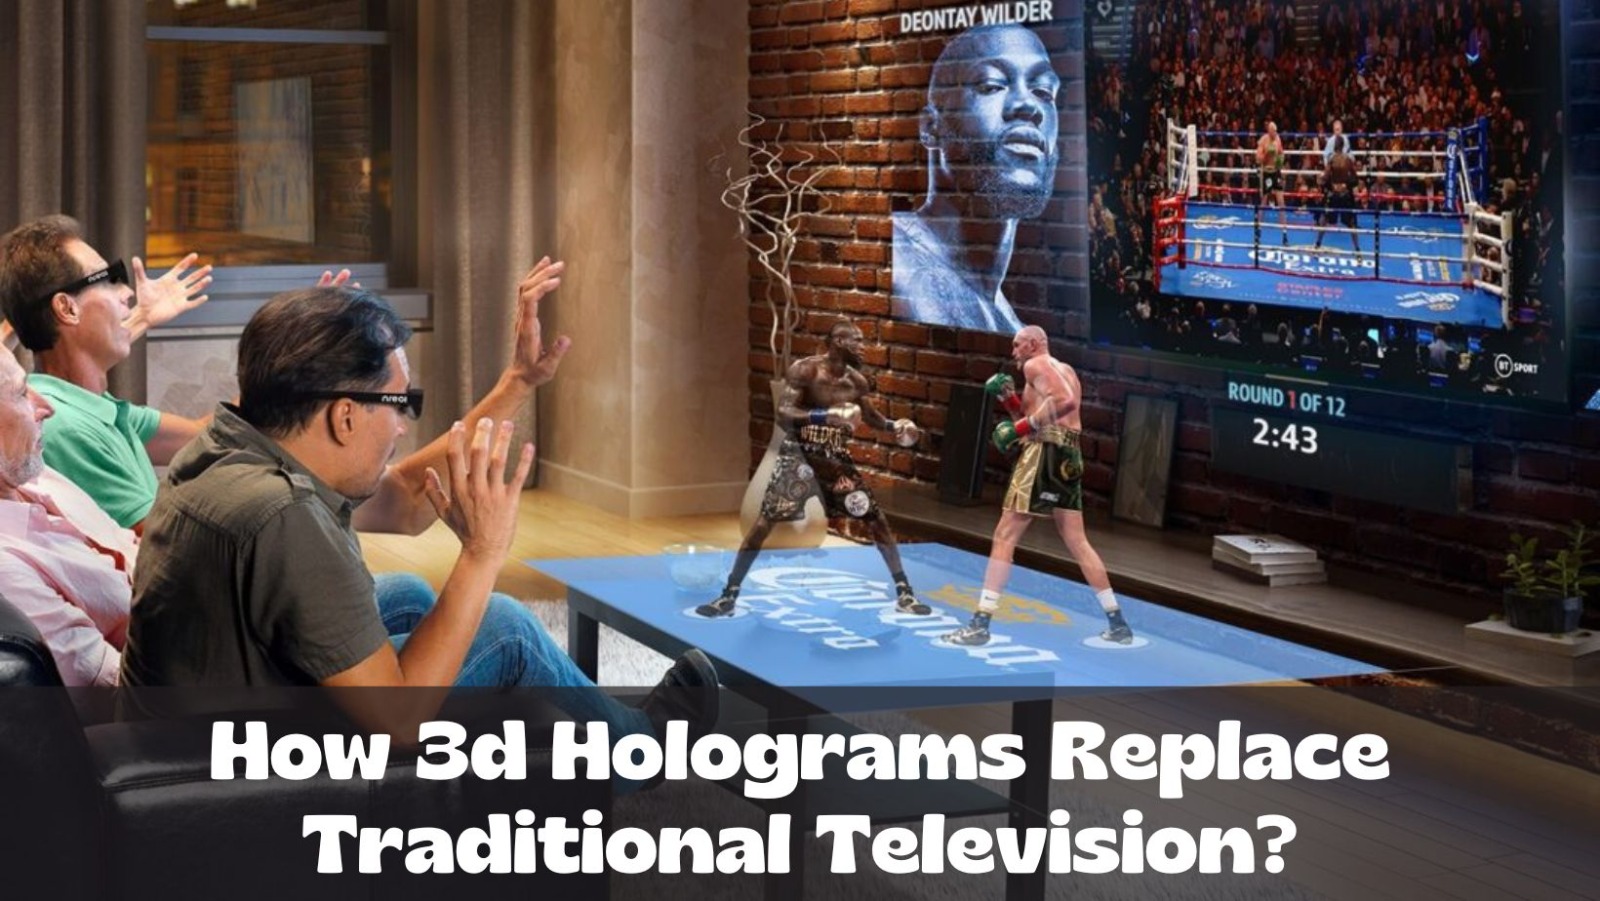 Holograms Replace Traditional Television